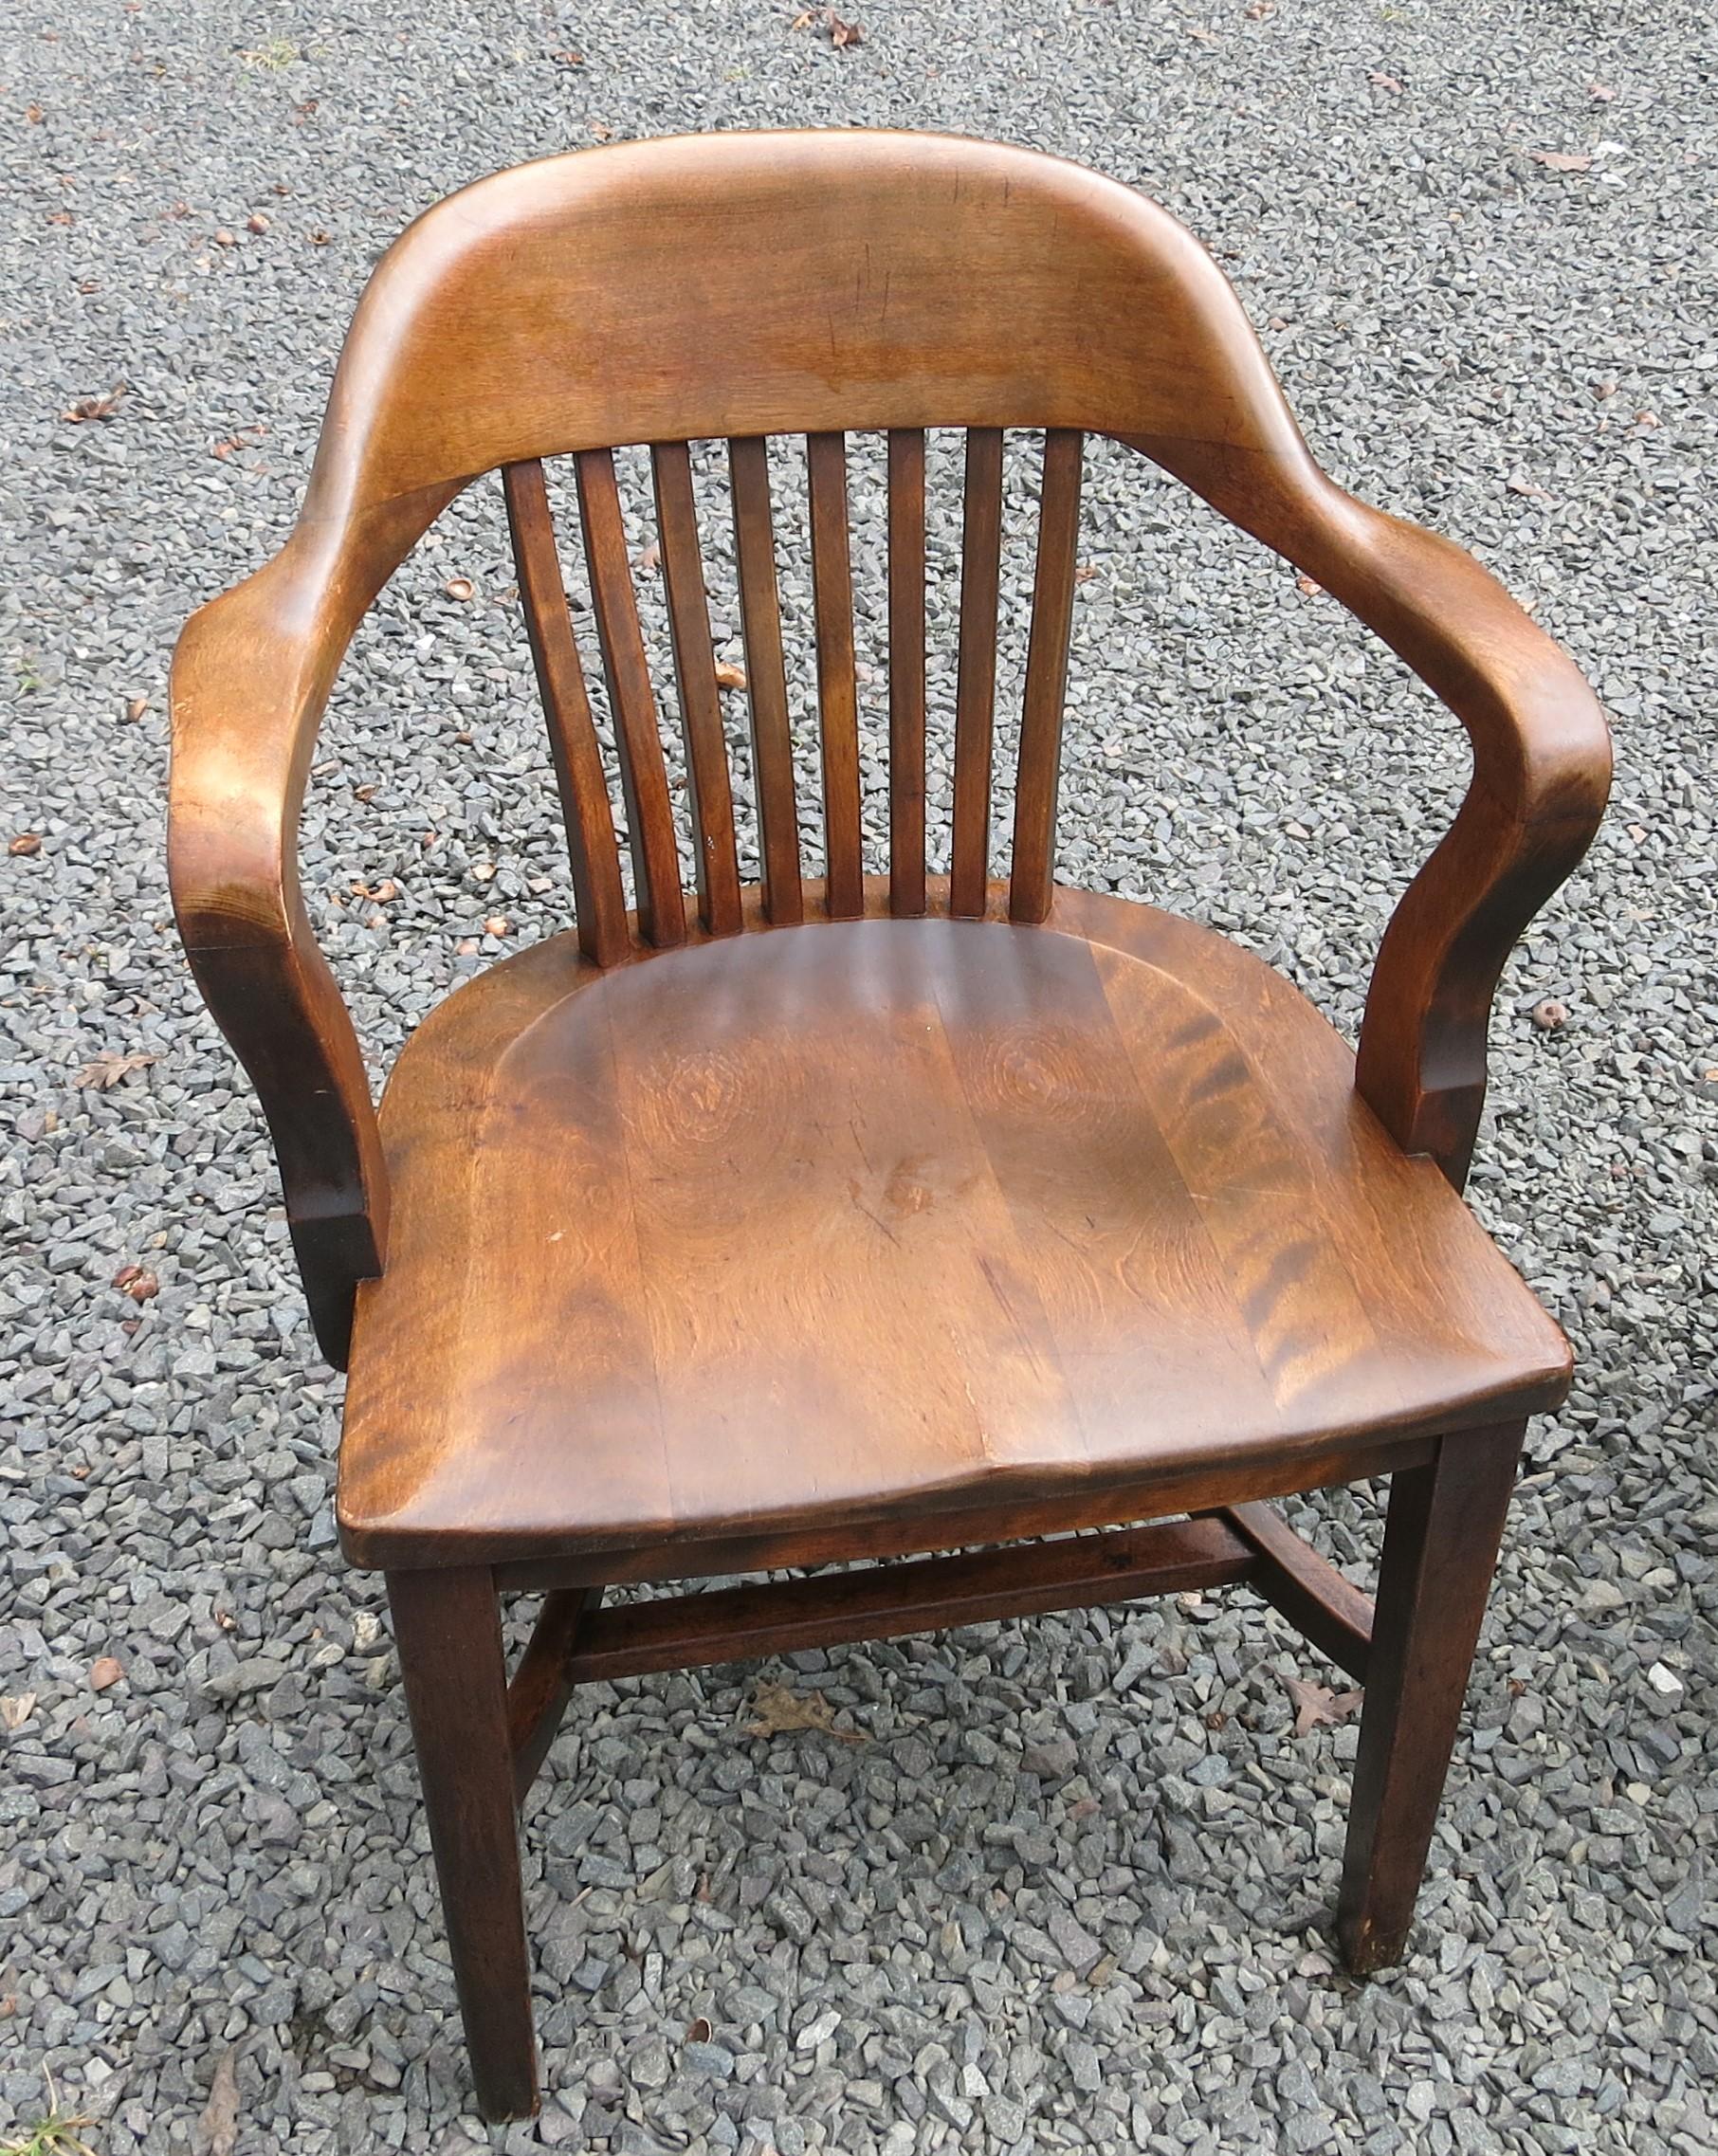 Solid wood B.L. Marble bankers chairs. They are 23.75